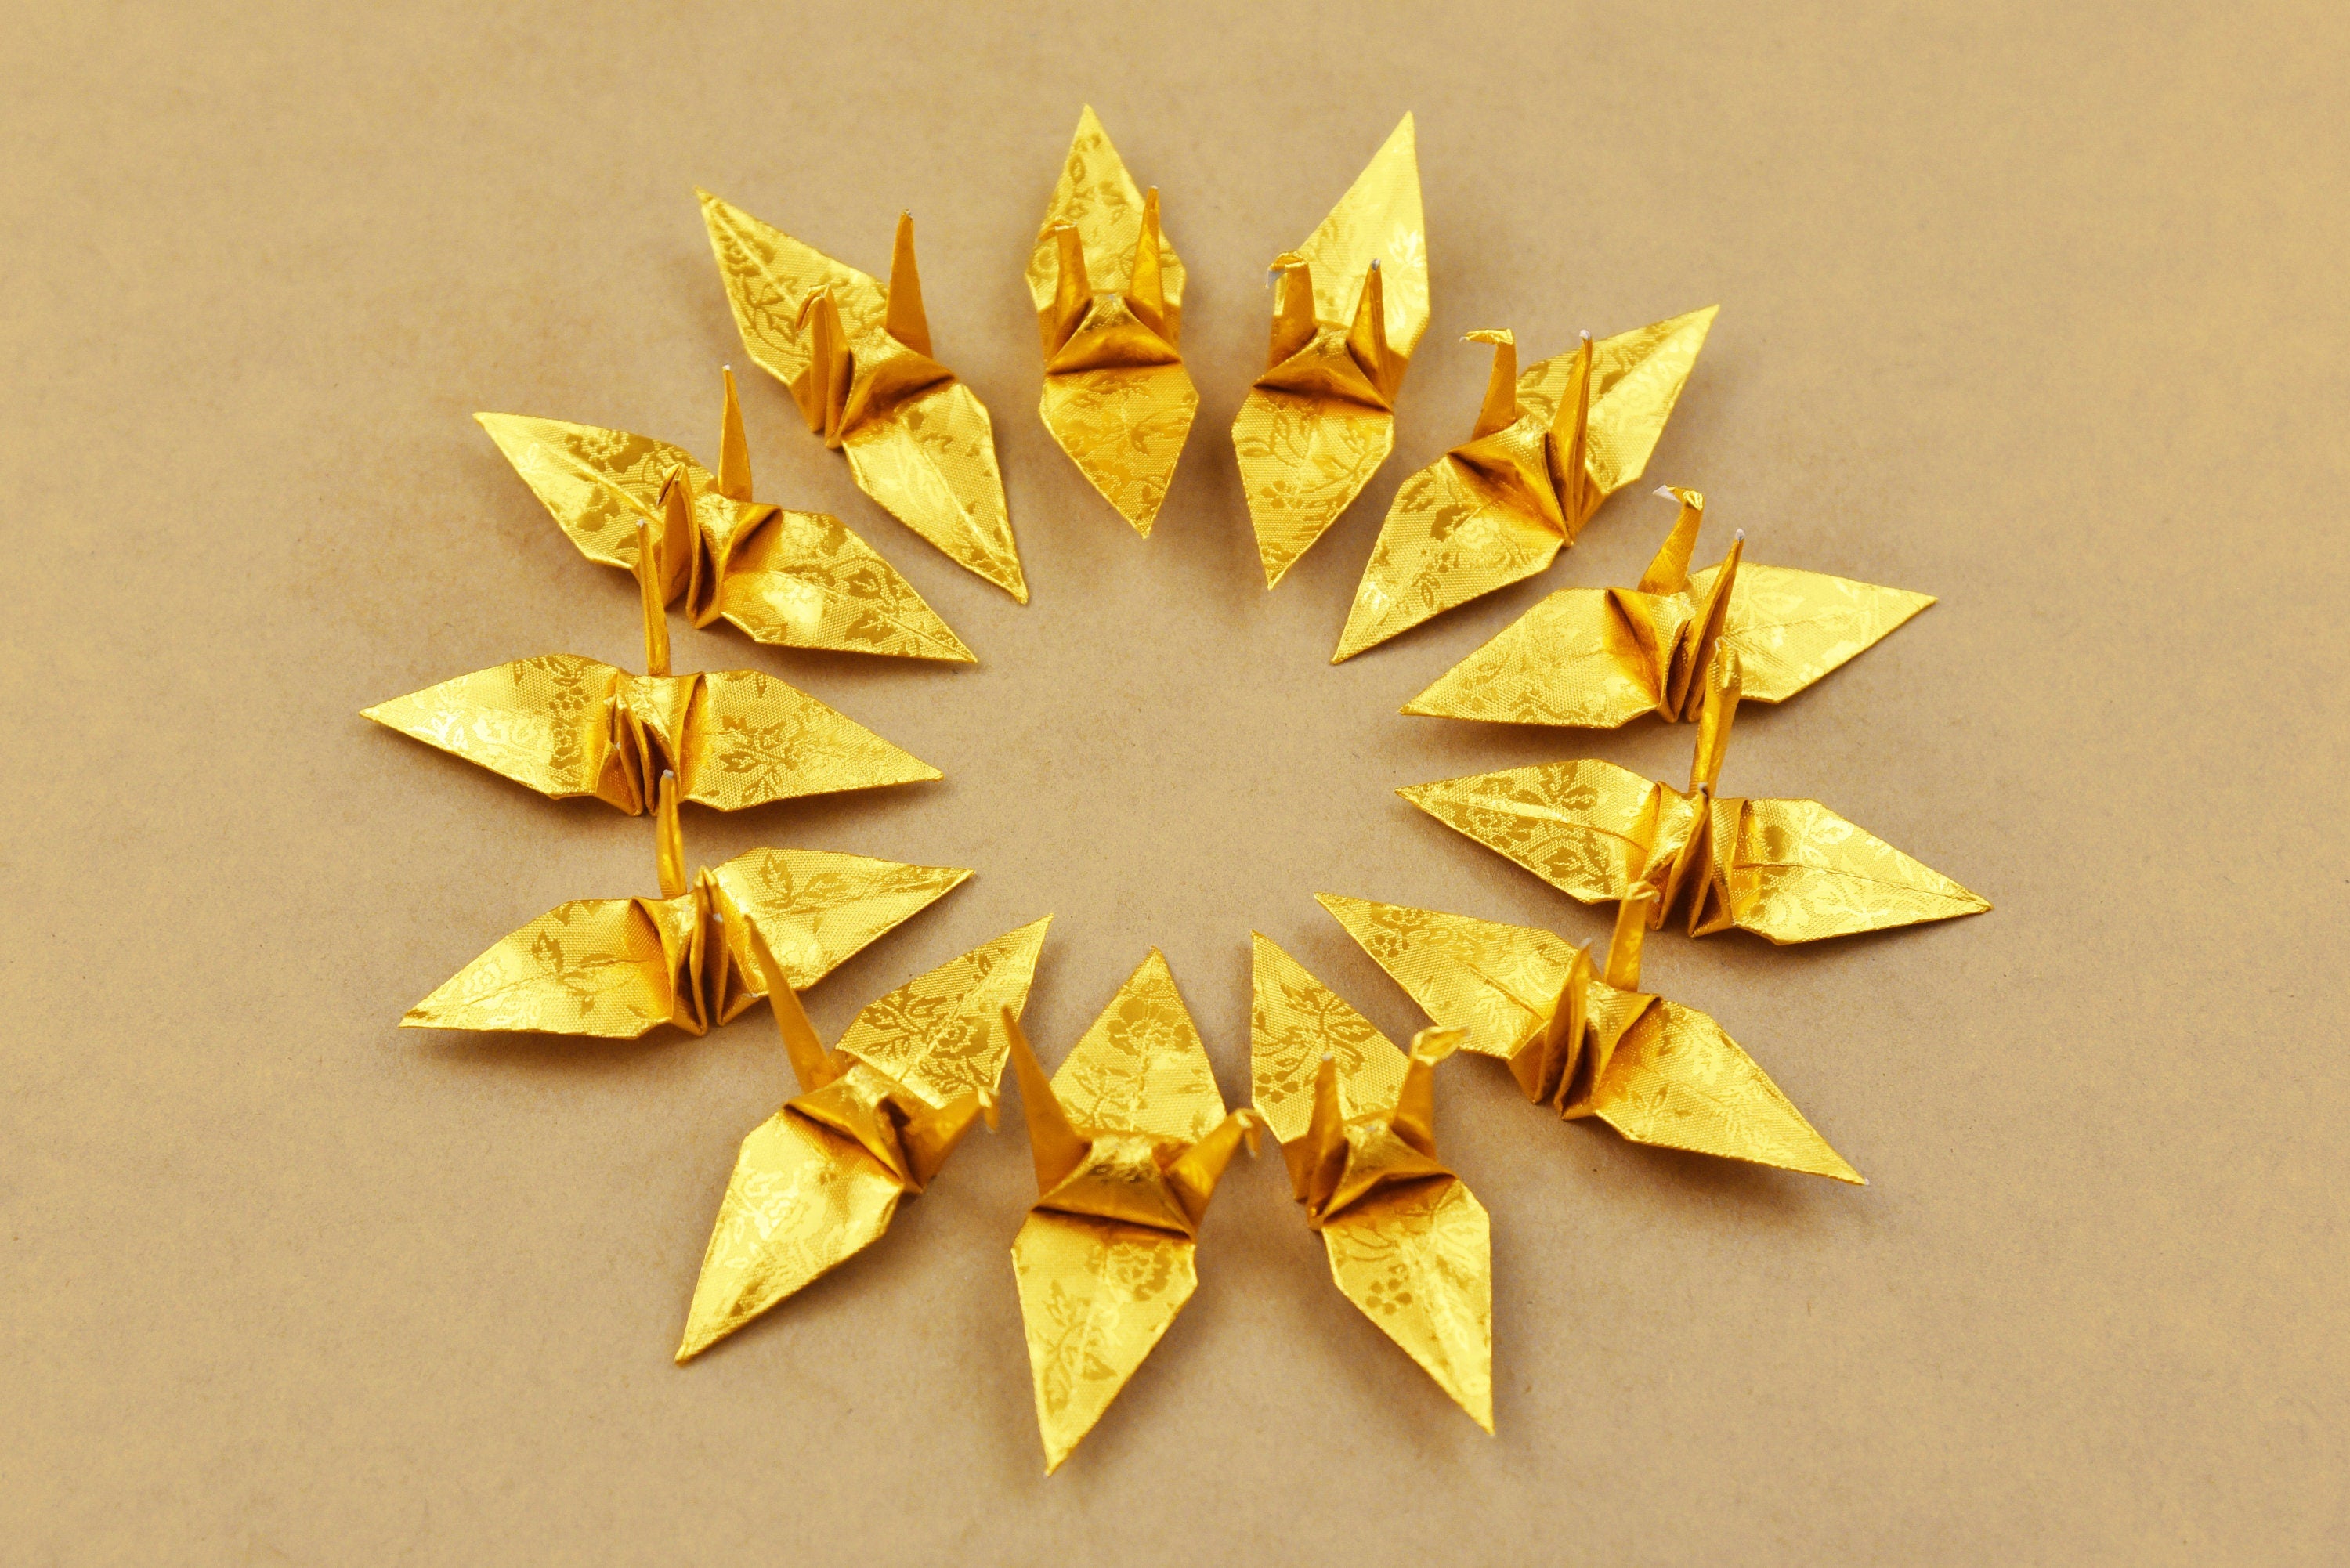 100 Origami Crane Gold with Rose Pattern Made of 7.5 cm (3x3 inch) - for Ornament, Decoration, Wedding